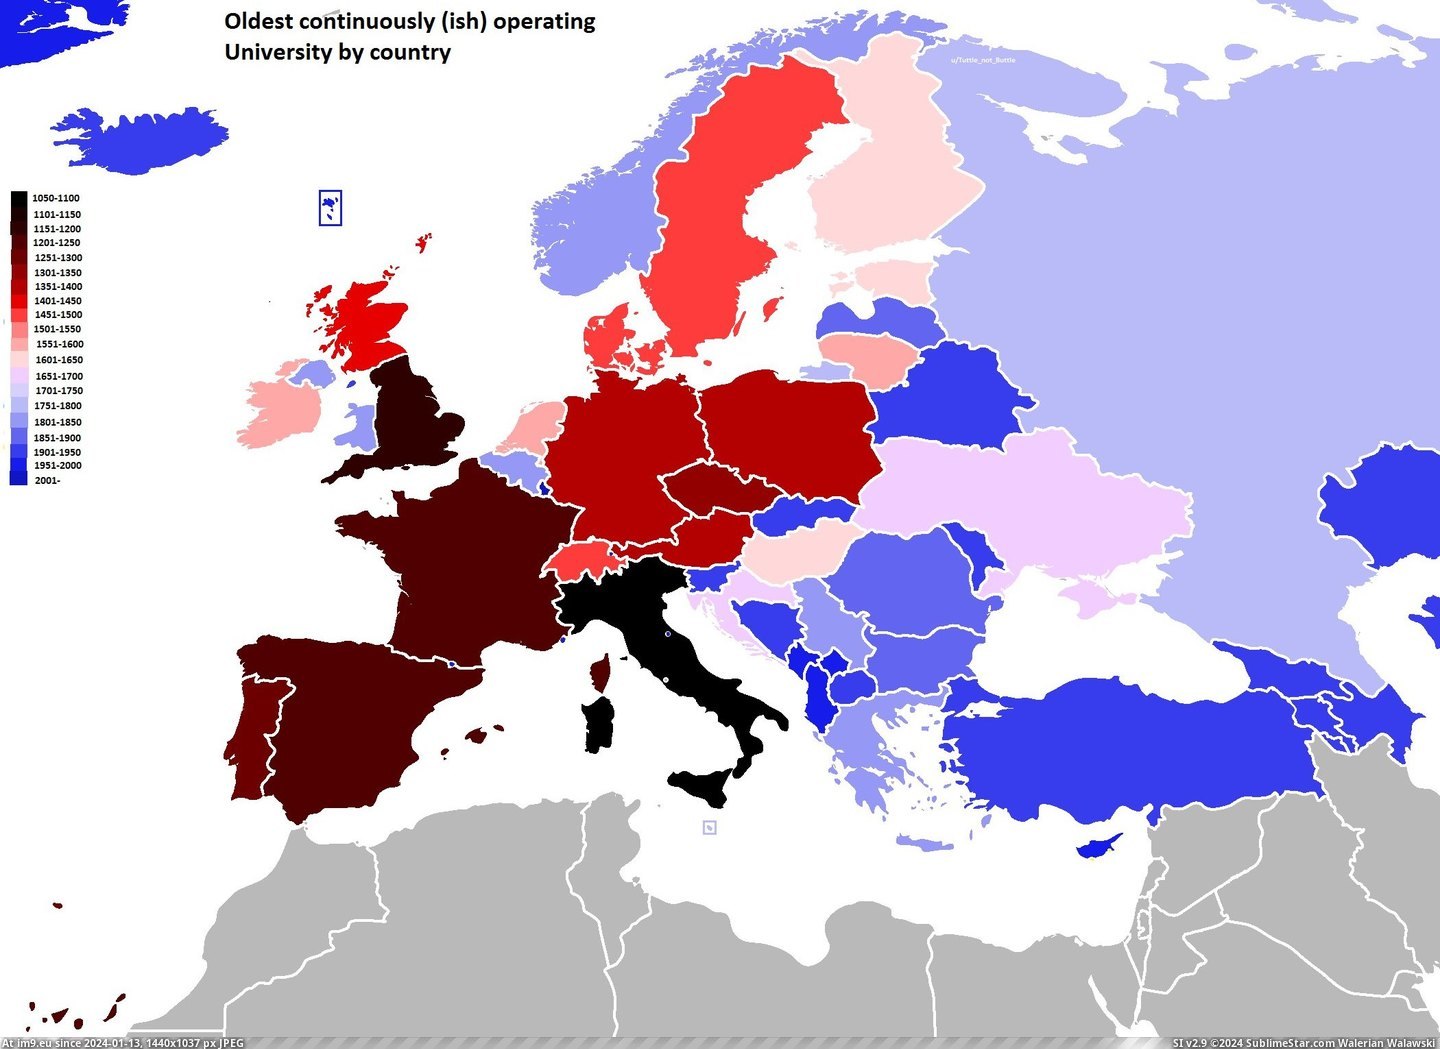 #European #Countries #University #Operating #Continuously #Oldest #2100x1525 #Establishment [Mapporn] Date of establishment of oldest continuously operating University in European countries (2100x1525) [OC] Pic. (Bild von album My r/MAPS favs))